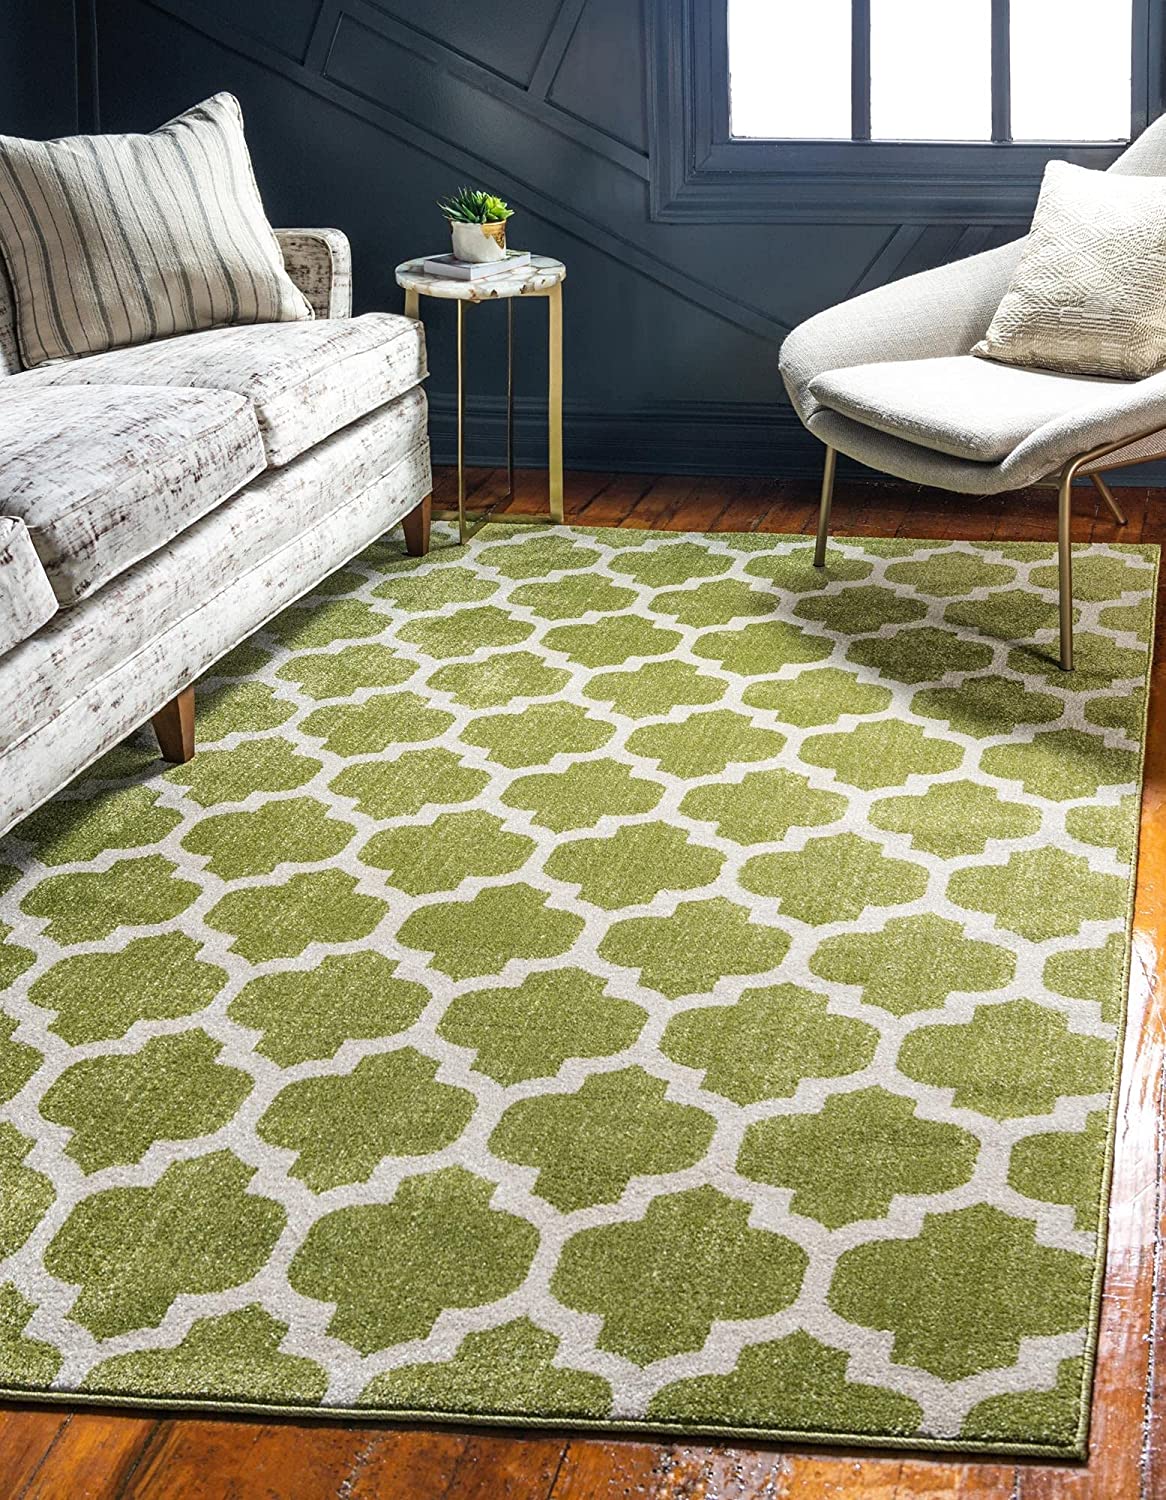 Photo 1 of Unique Loom Trellis Collection Modern Morroccan Inspired with Lattice Design Area Rug 5 x 8 GreenBeige